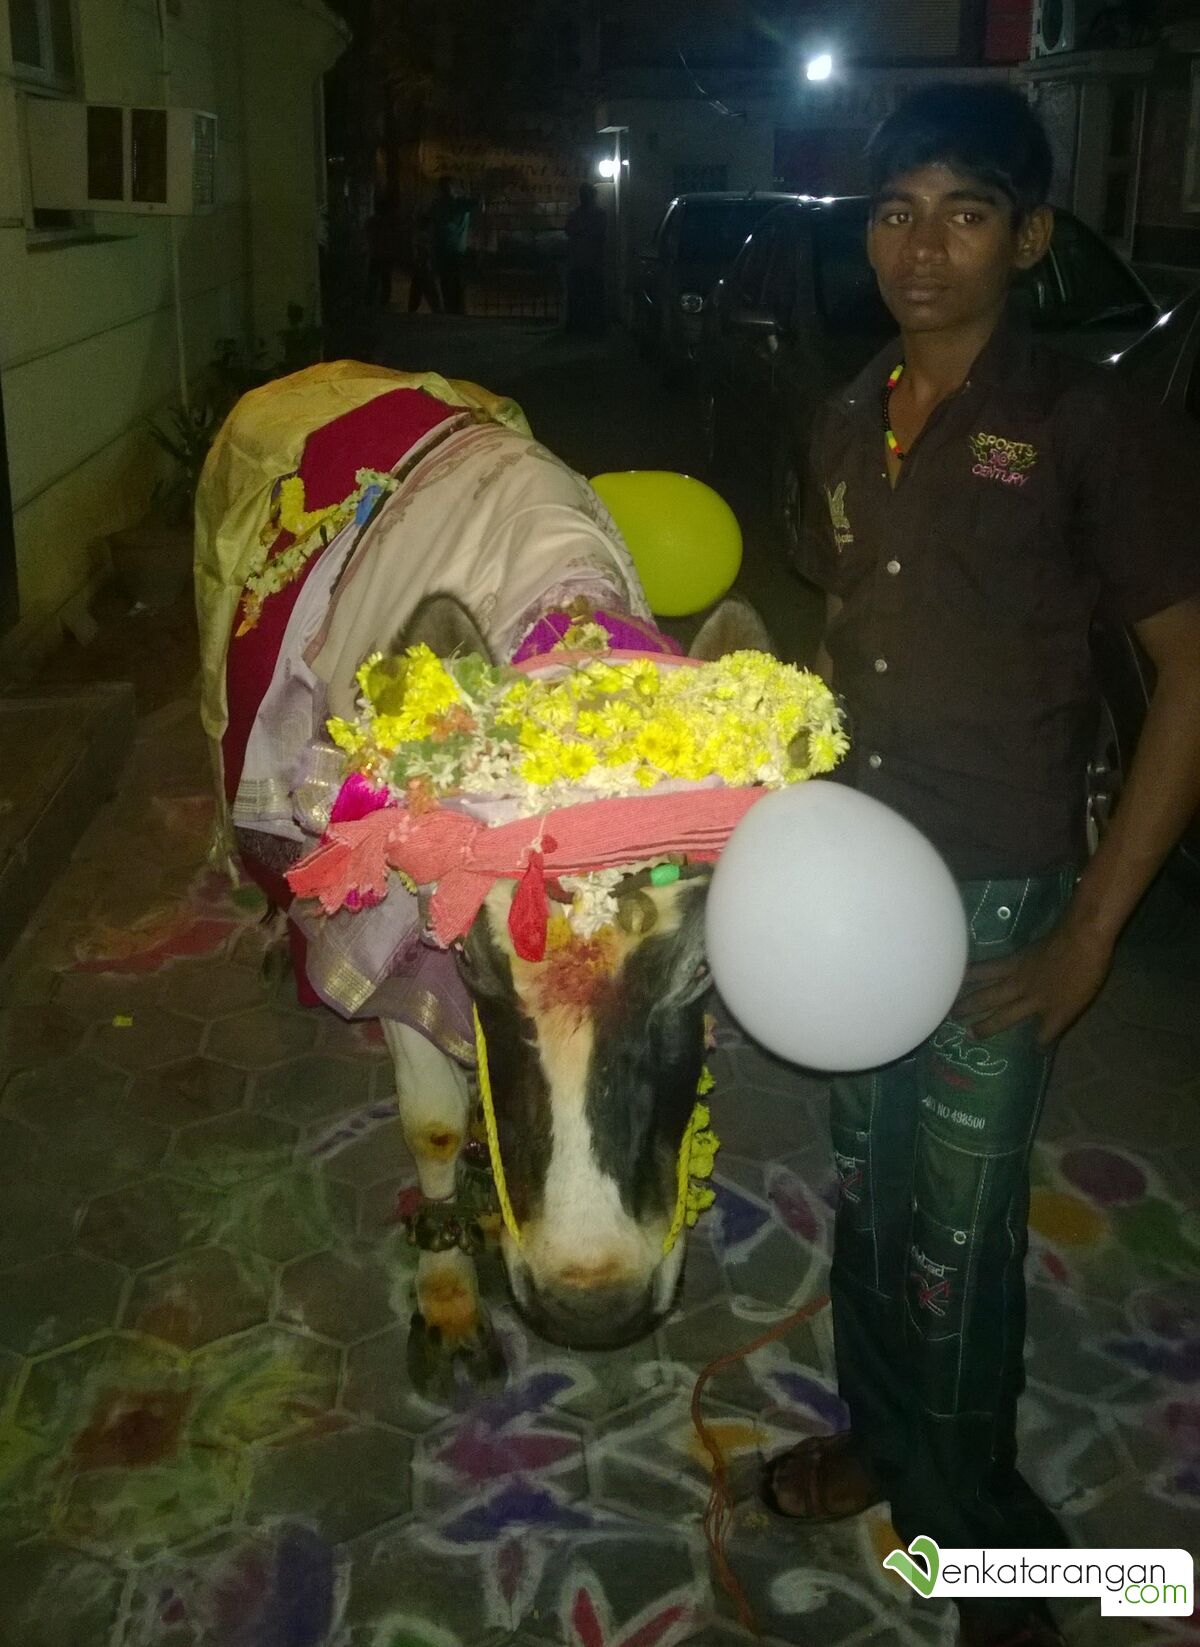 Visit of a different cow to our house in 2014 (2014யில் வேறொரு பசு மாட்டோடு அதன் காப்பாளர்)